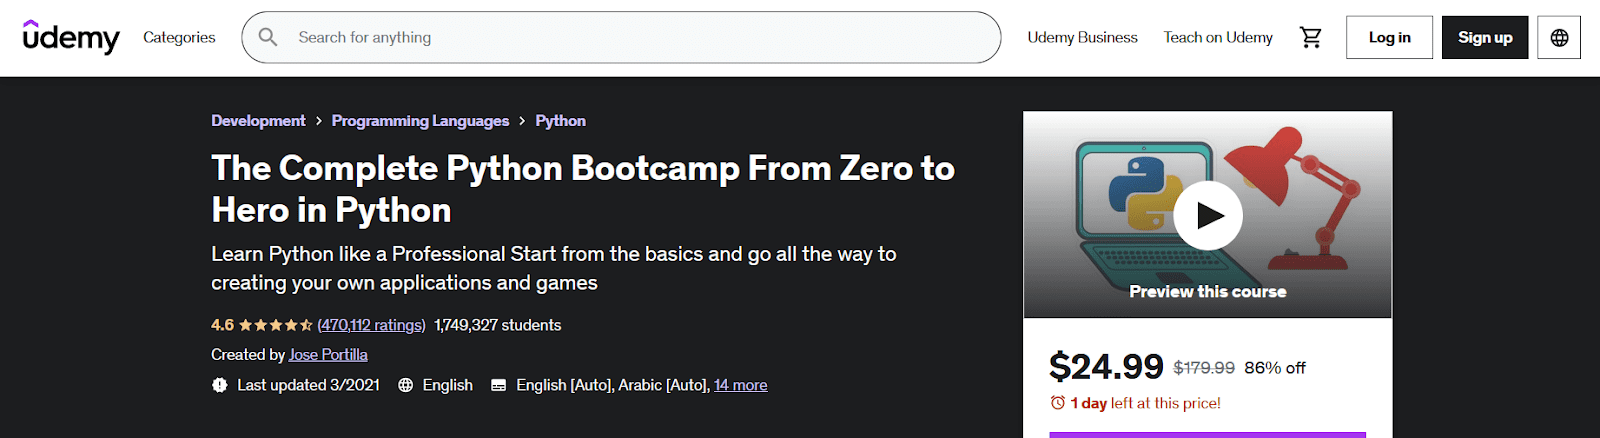 The complete Python Bootcamp from Zero to Hero in Python